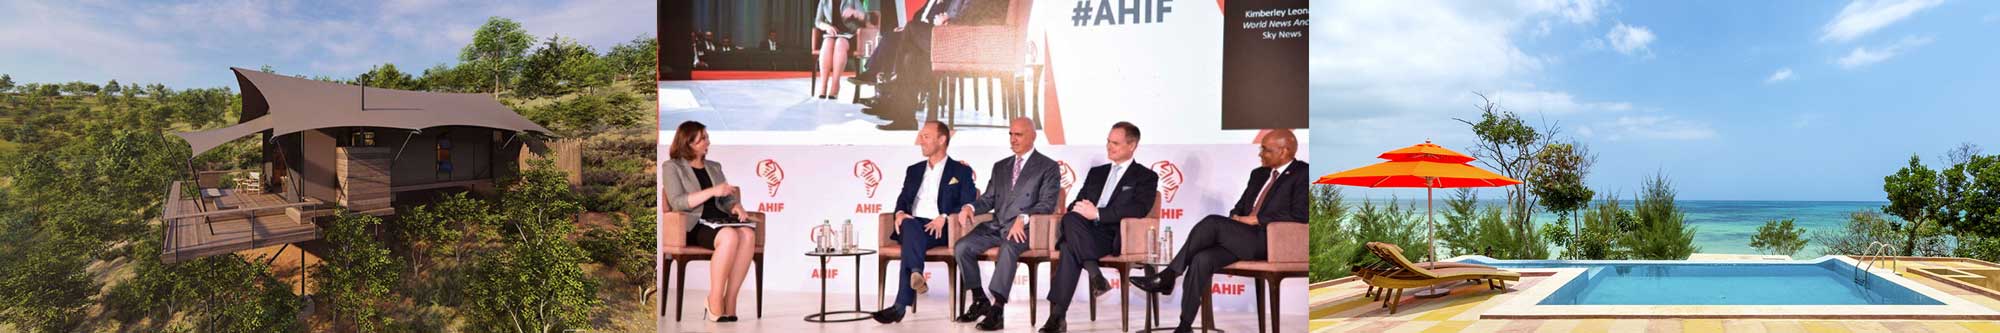 The Africa Hotel Investment Forum 2019 Top Stories